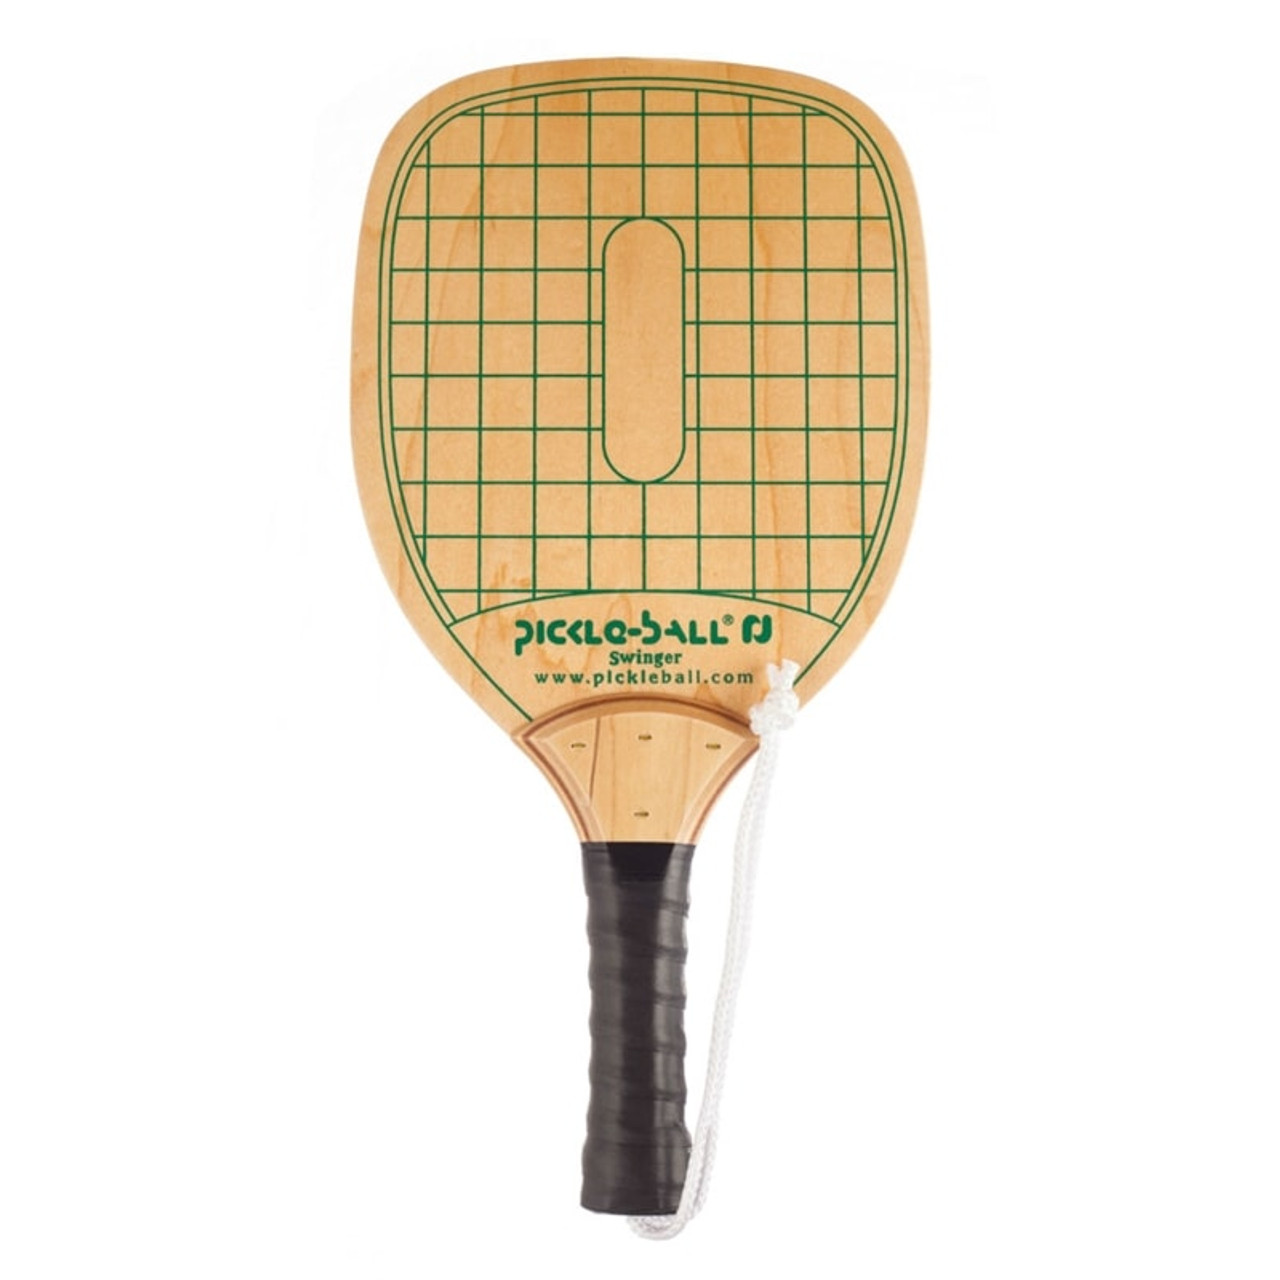 pickle-ball swinger wood paddle